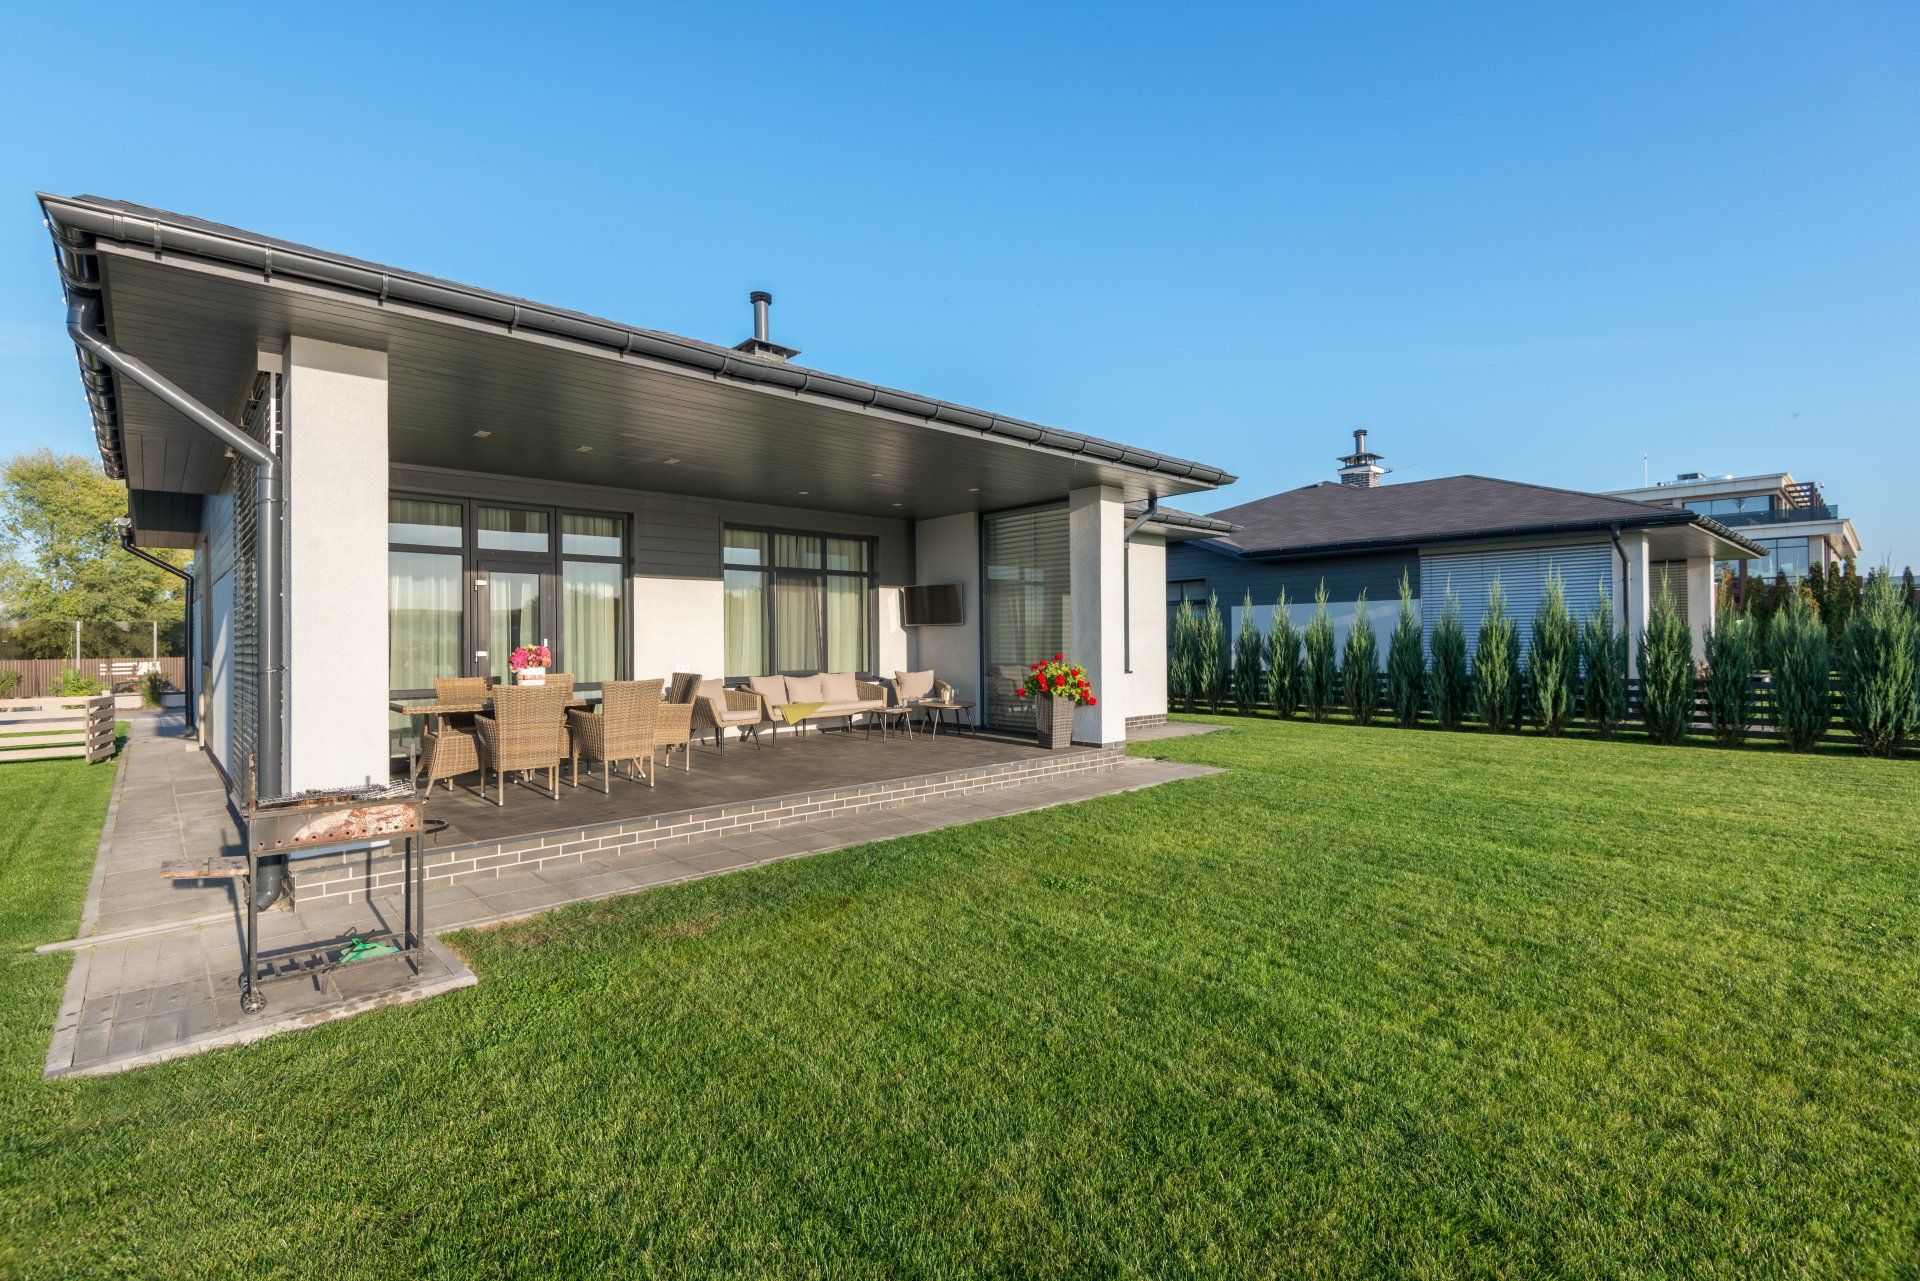 Scenic outdoor covered patio featuring a barbecue, a stylish dining table, and a comfortable seating area, with a picturesque view of a lush green grass field.